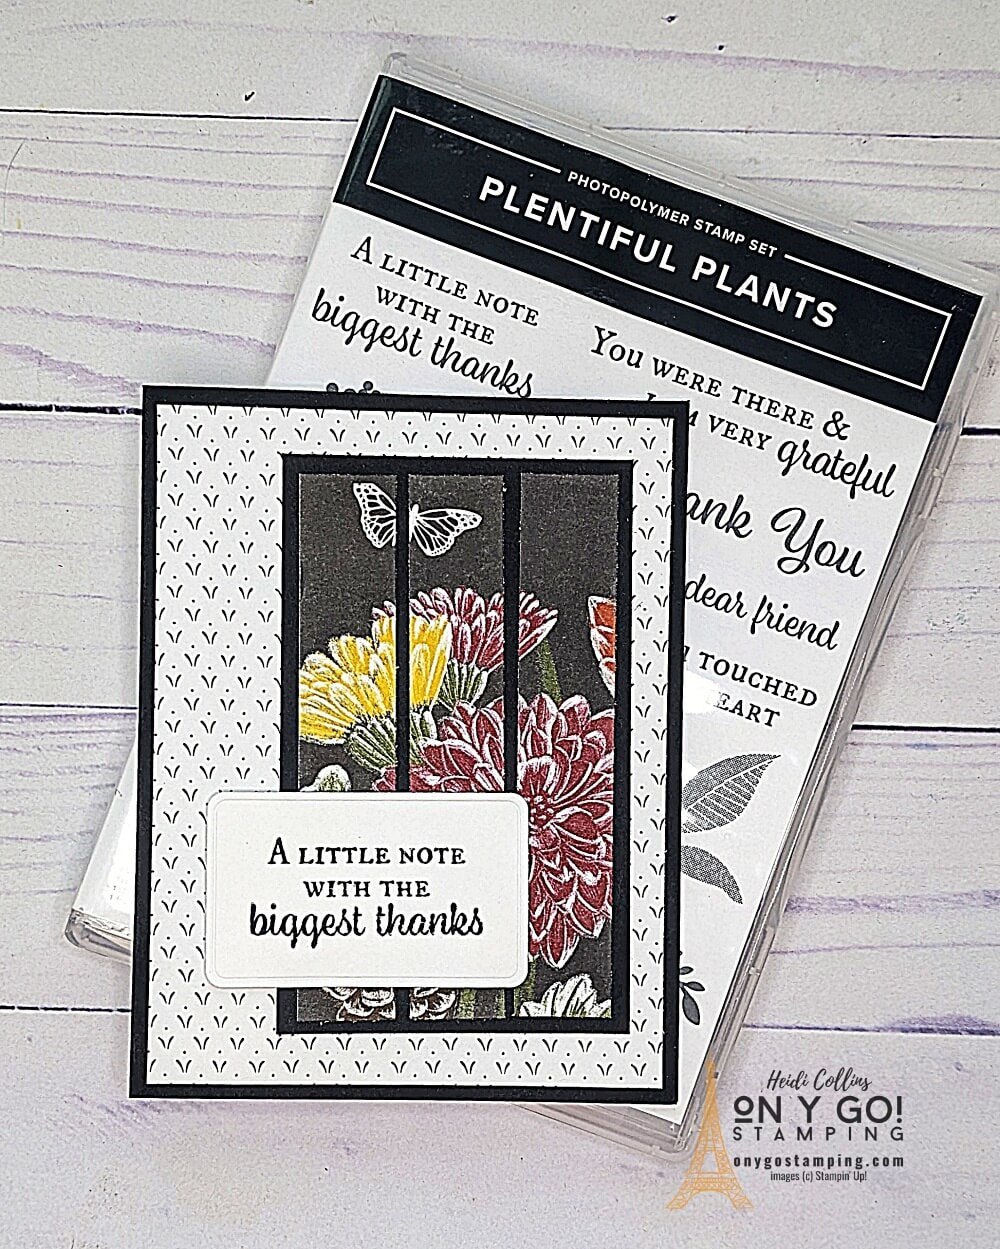 Fun thank you card idea using the Plentiful Plants stamp set and Rustic Harvest patterned paper from Stampin' Up!® Get the card sketch and free downloadable quick reference guide.